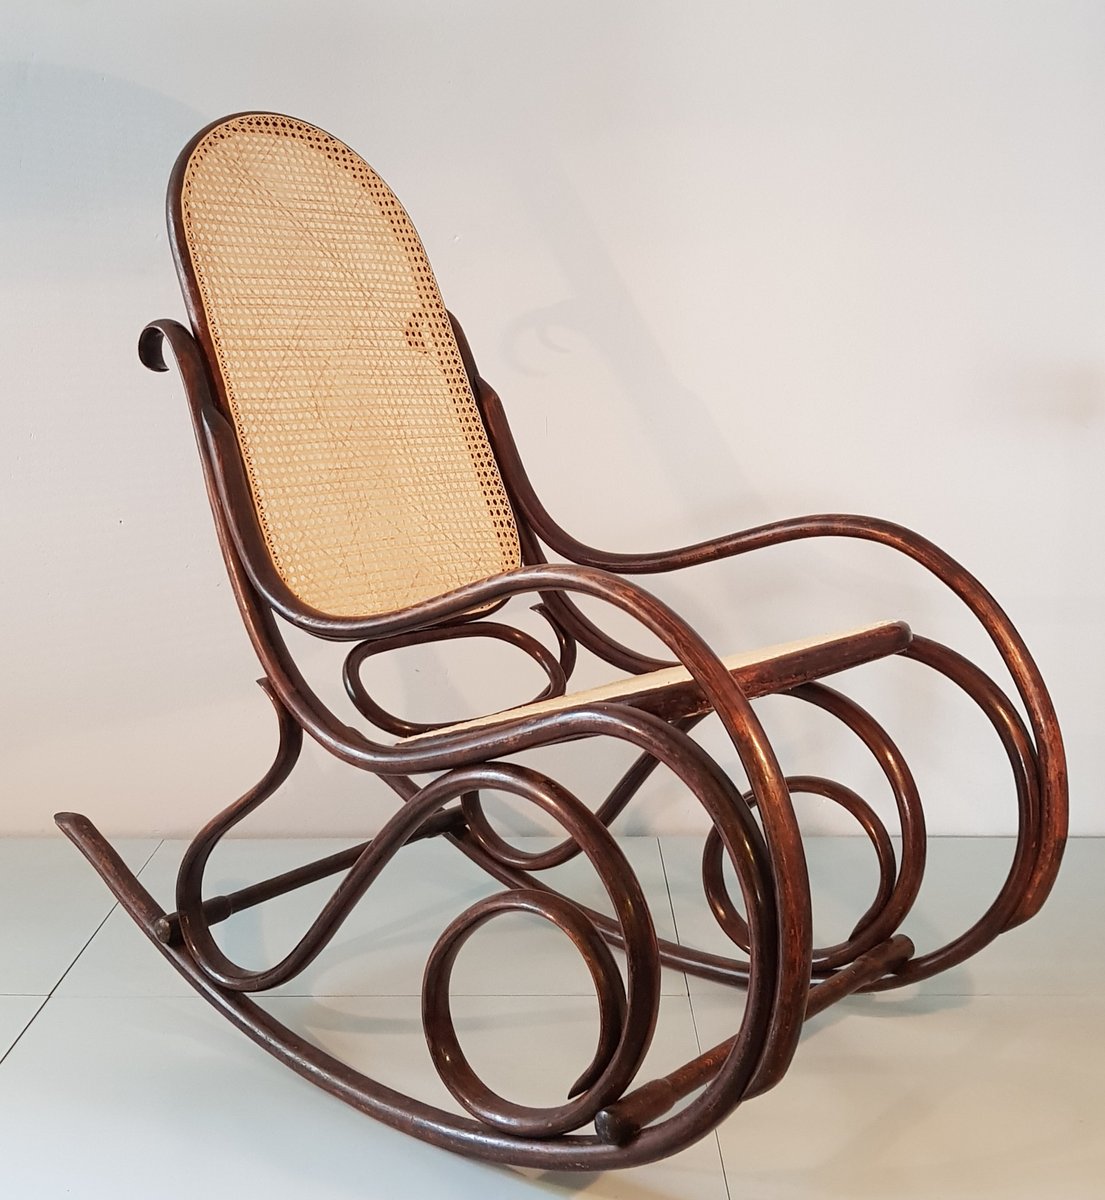 Antique No 14 Rocking Chair From Thonet For Sale At Pamono